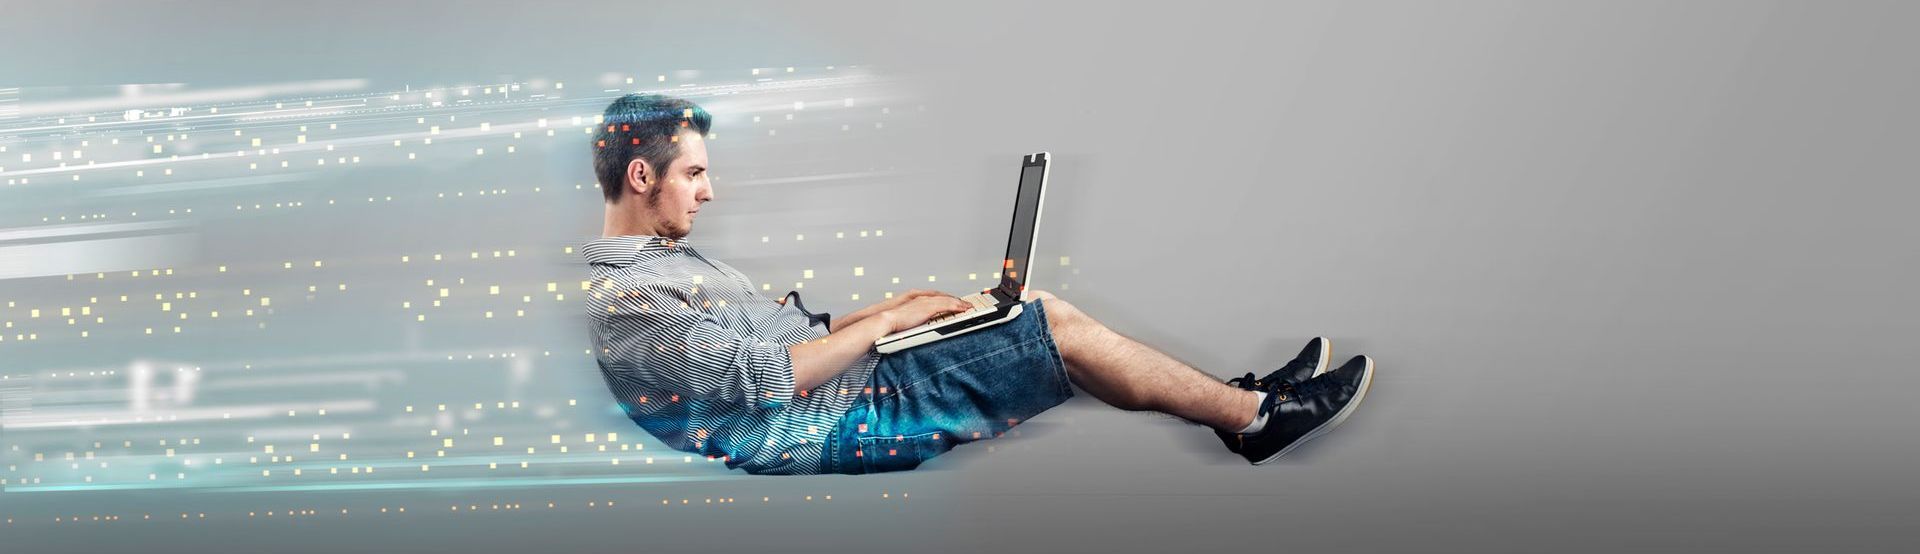 man floating in the air with laptop with speed pixels behind him